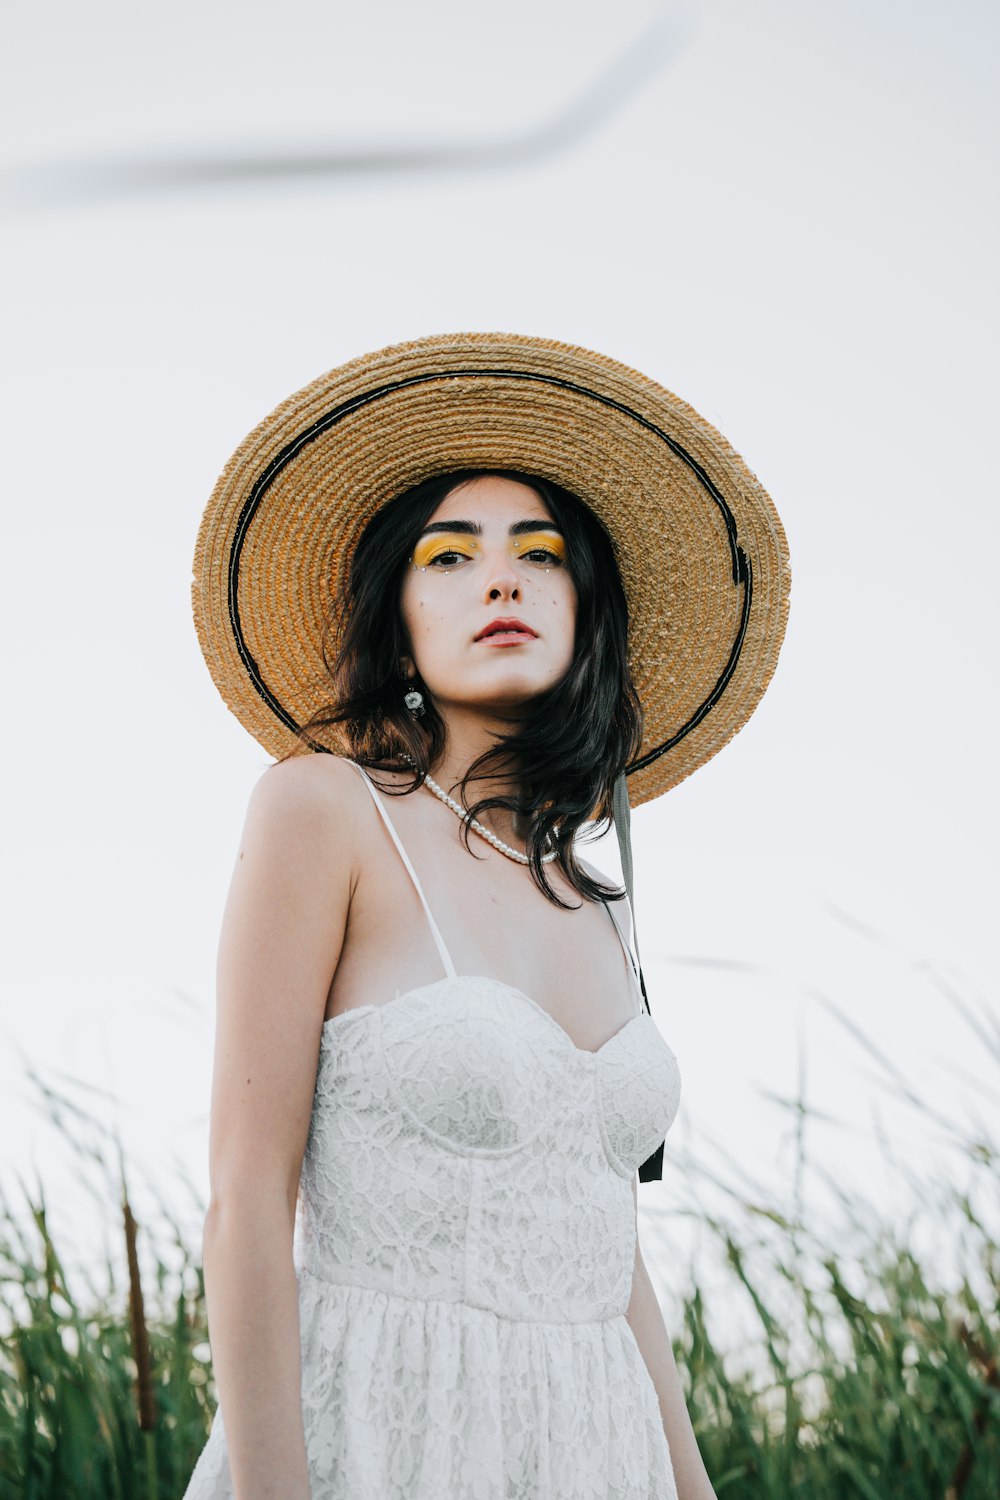 a woman wearing a straw hat and a white dress